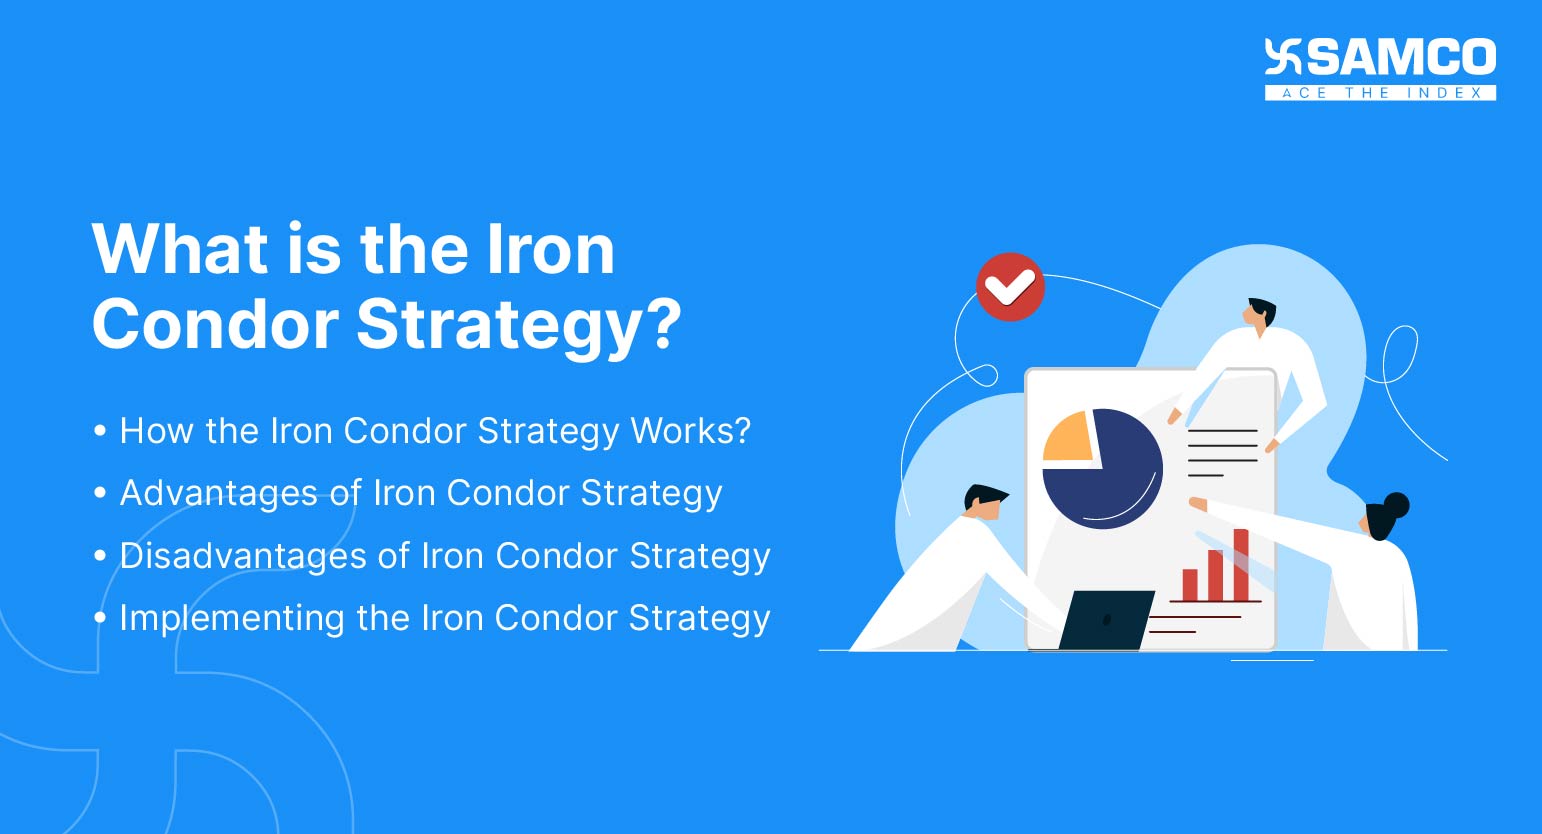 What is the Iron Condor Strategy